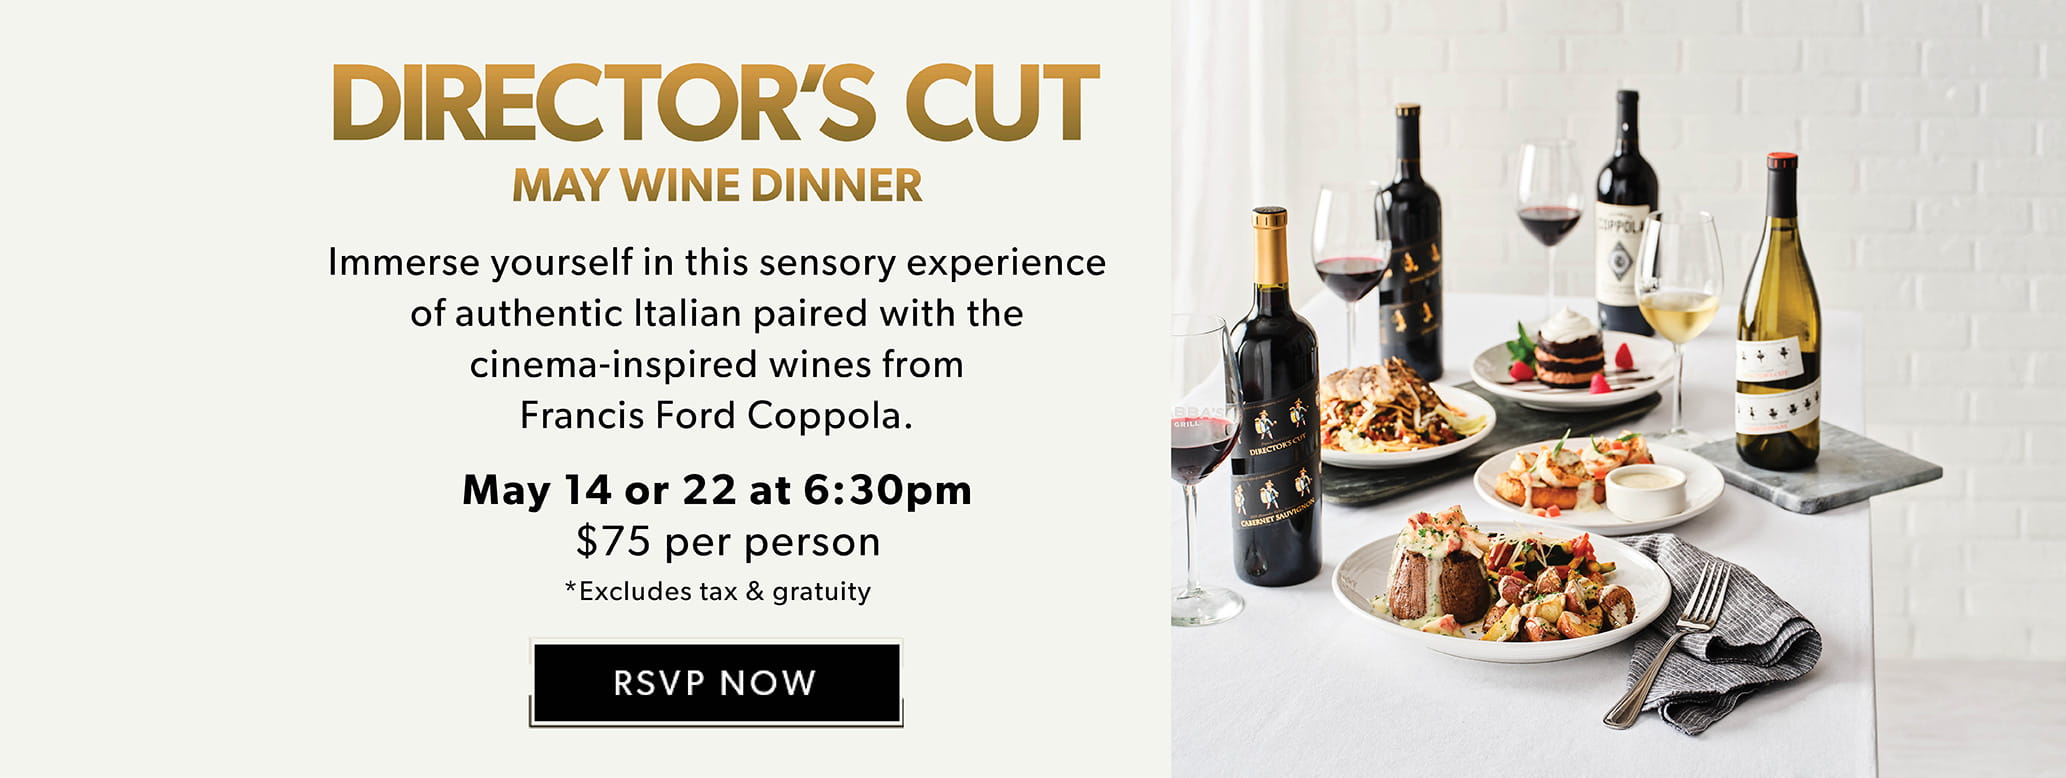 Director's Cut May Wine Dinner